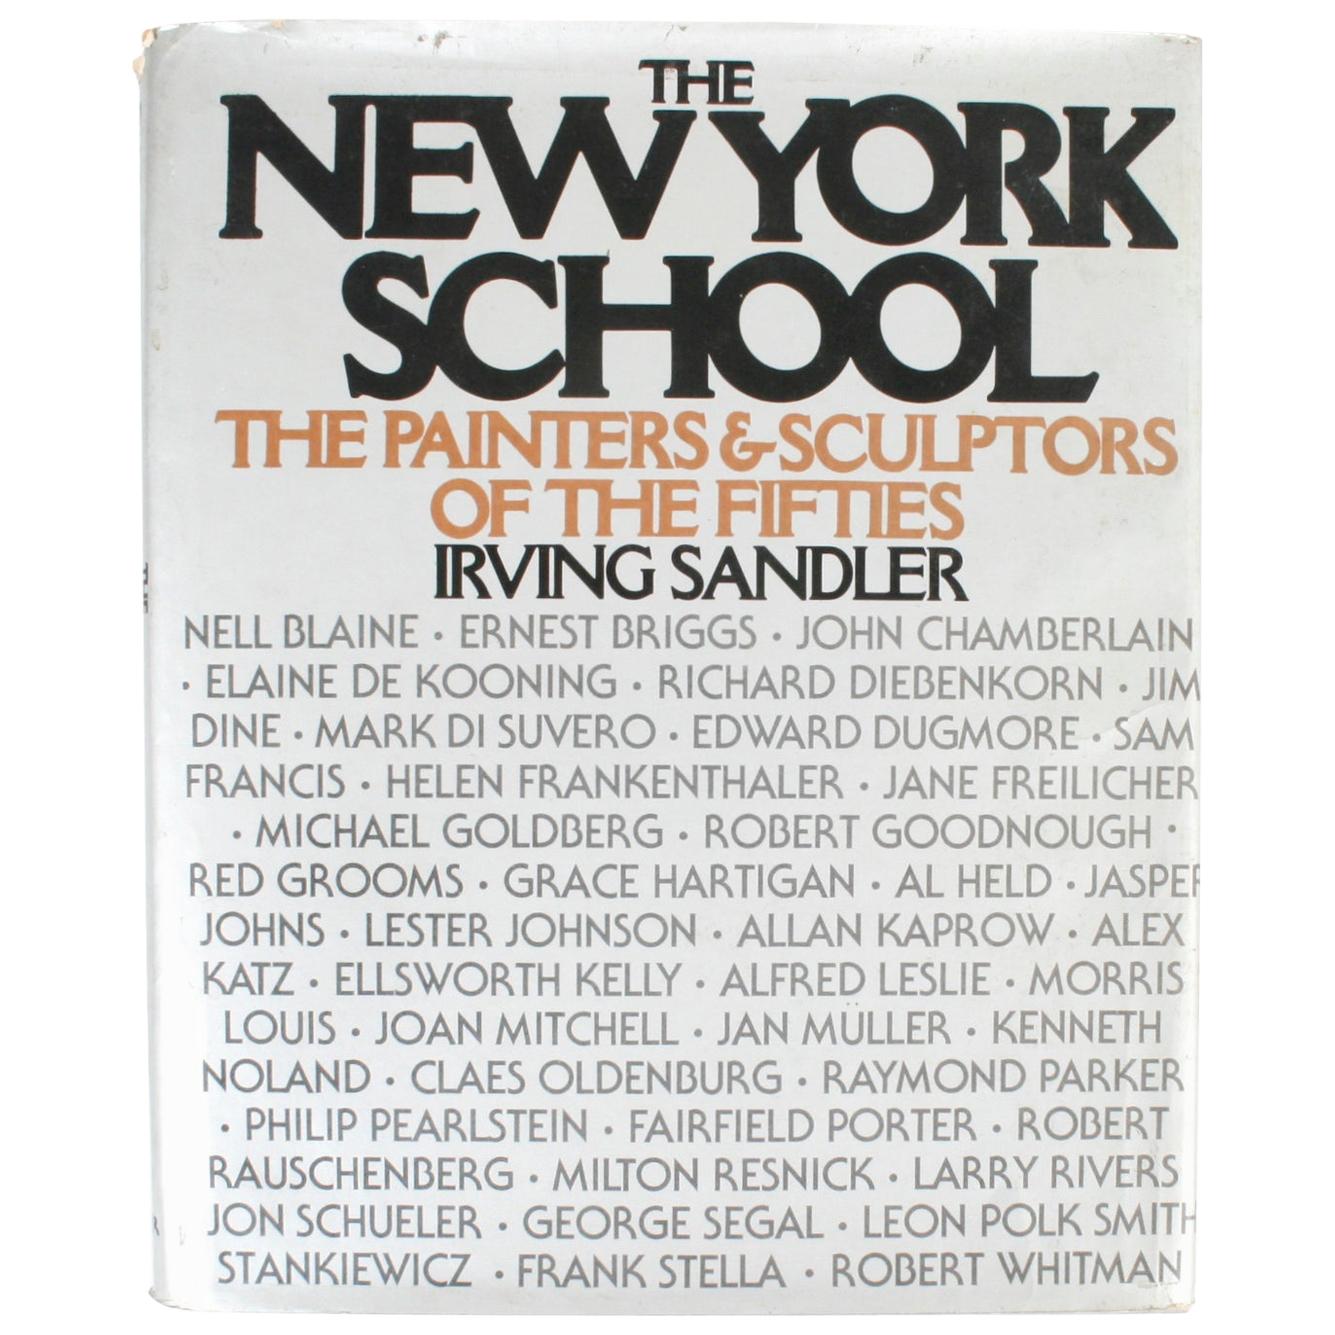 The New York School: The Painters & Sculptors of the Fifties, First Edition